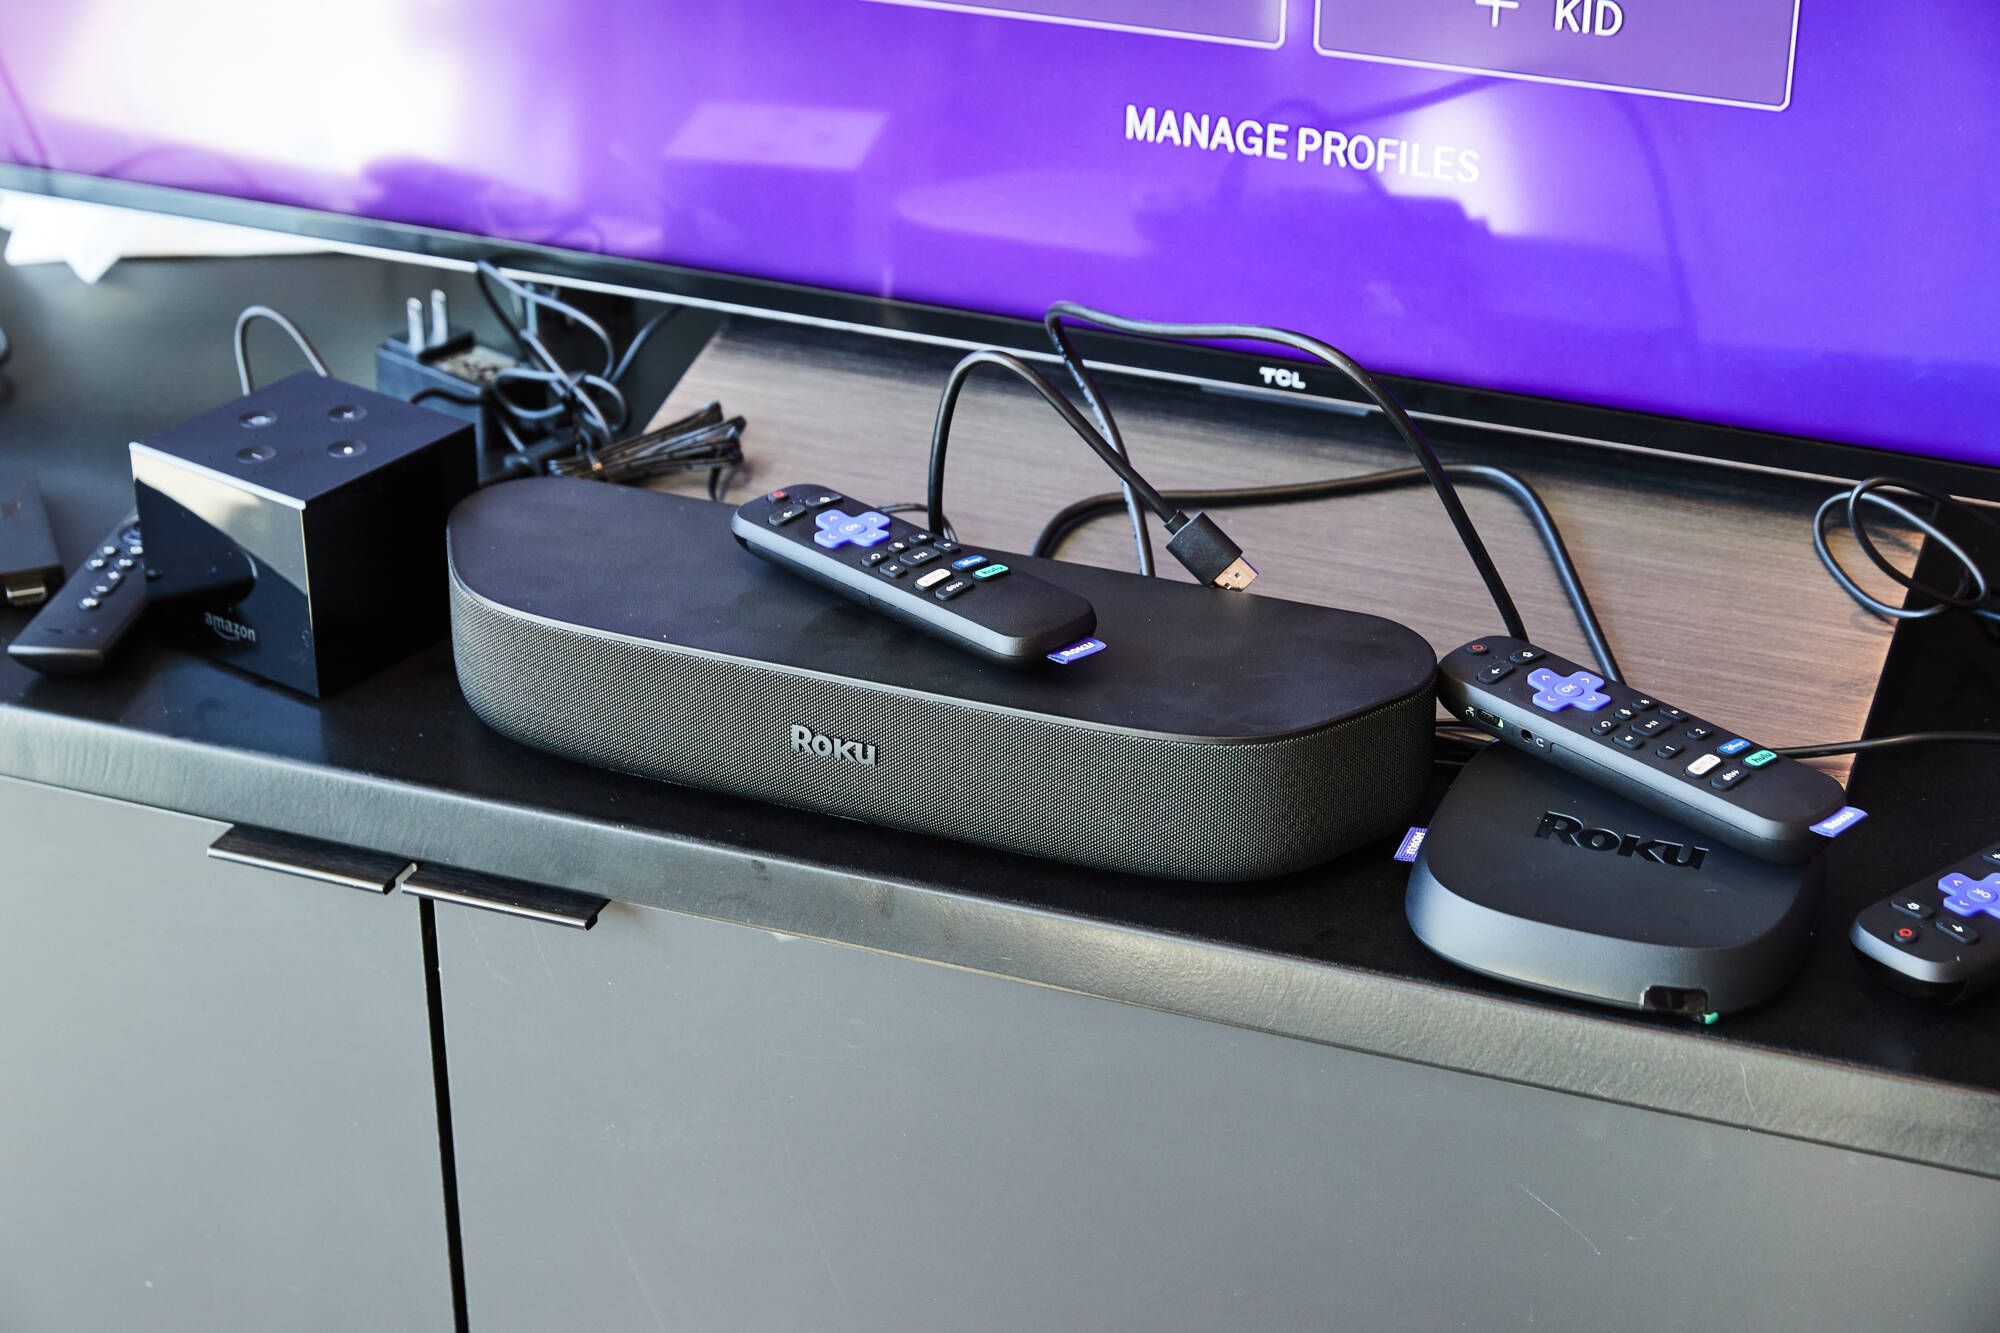 Roku vs.  Fire TV: Which Streaming Device Reigns Supreme? - CNET